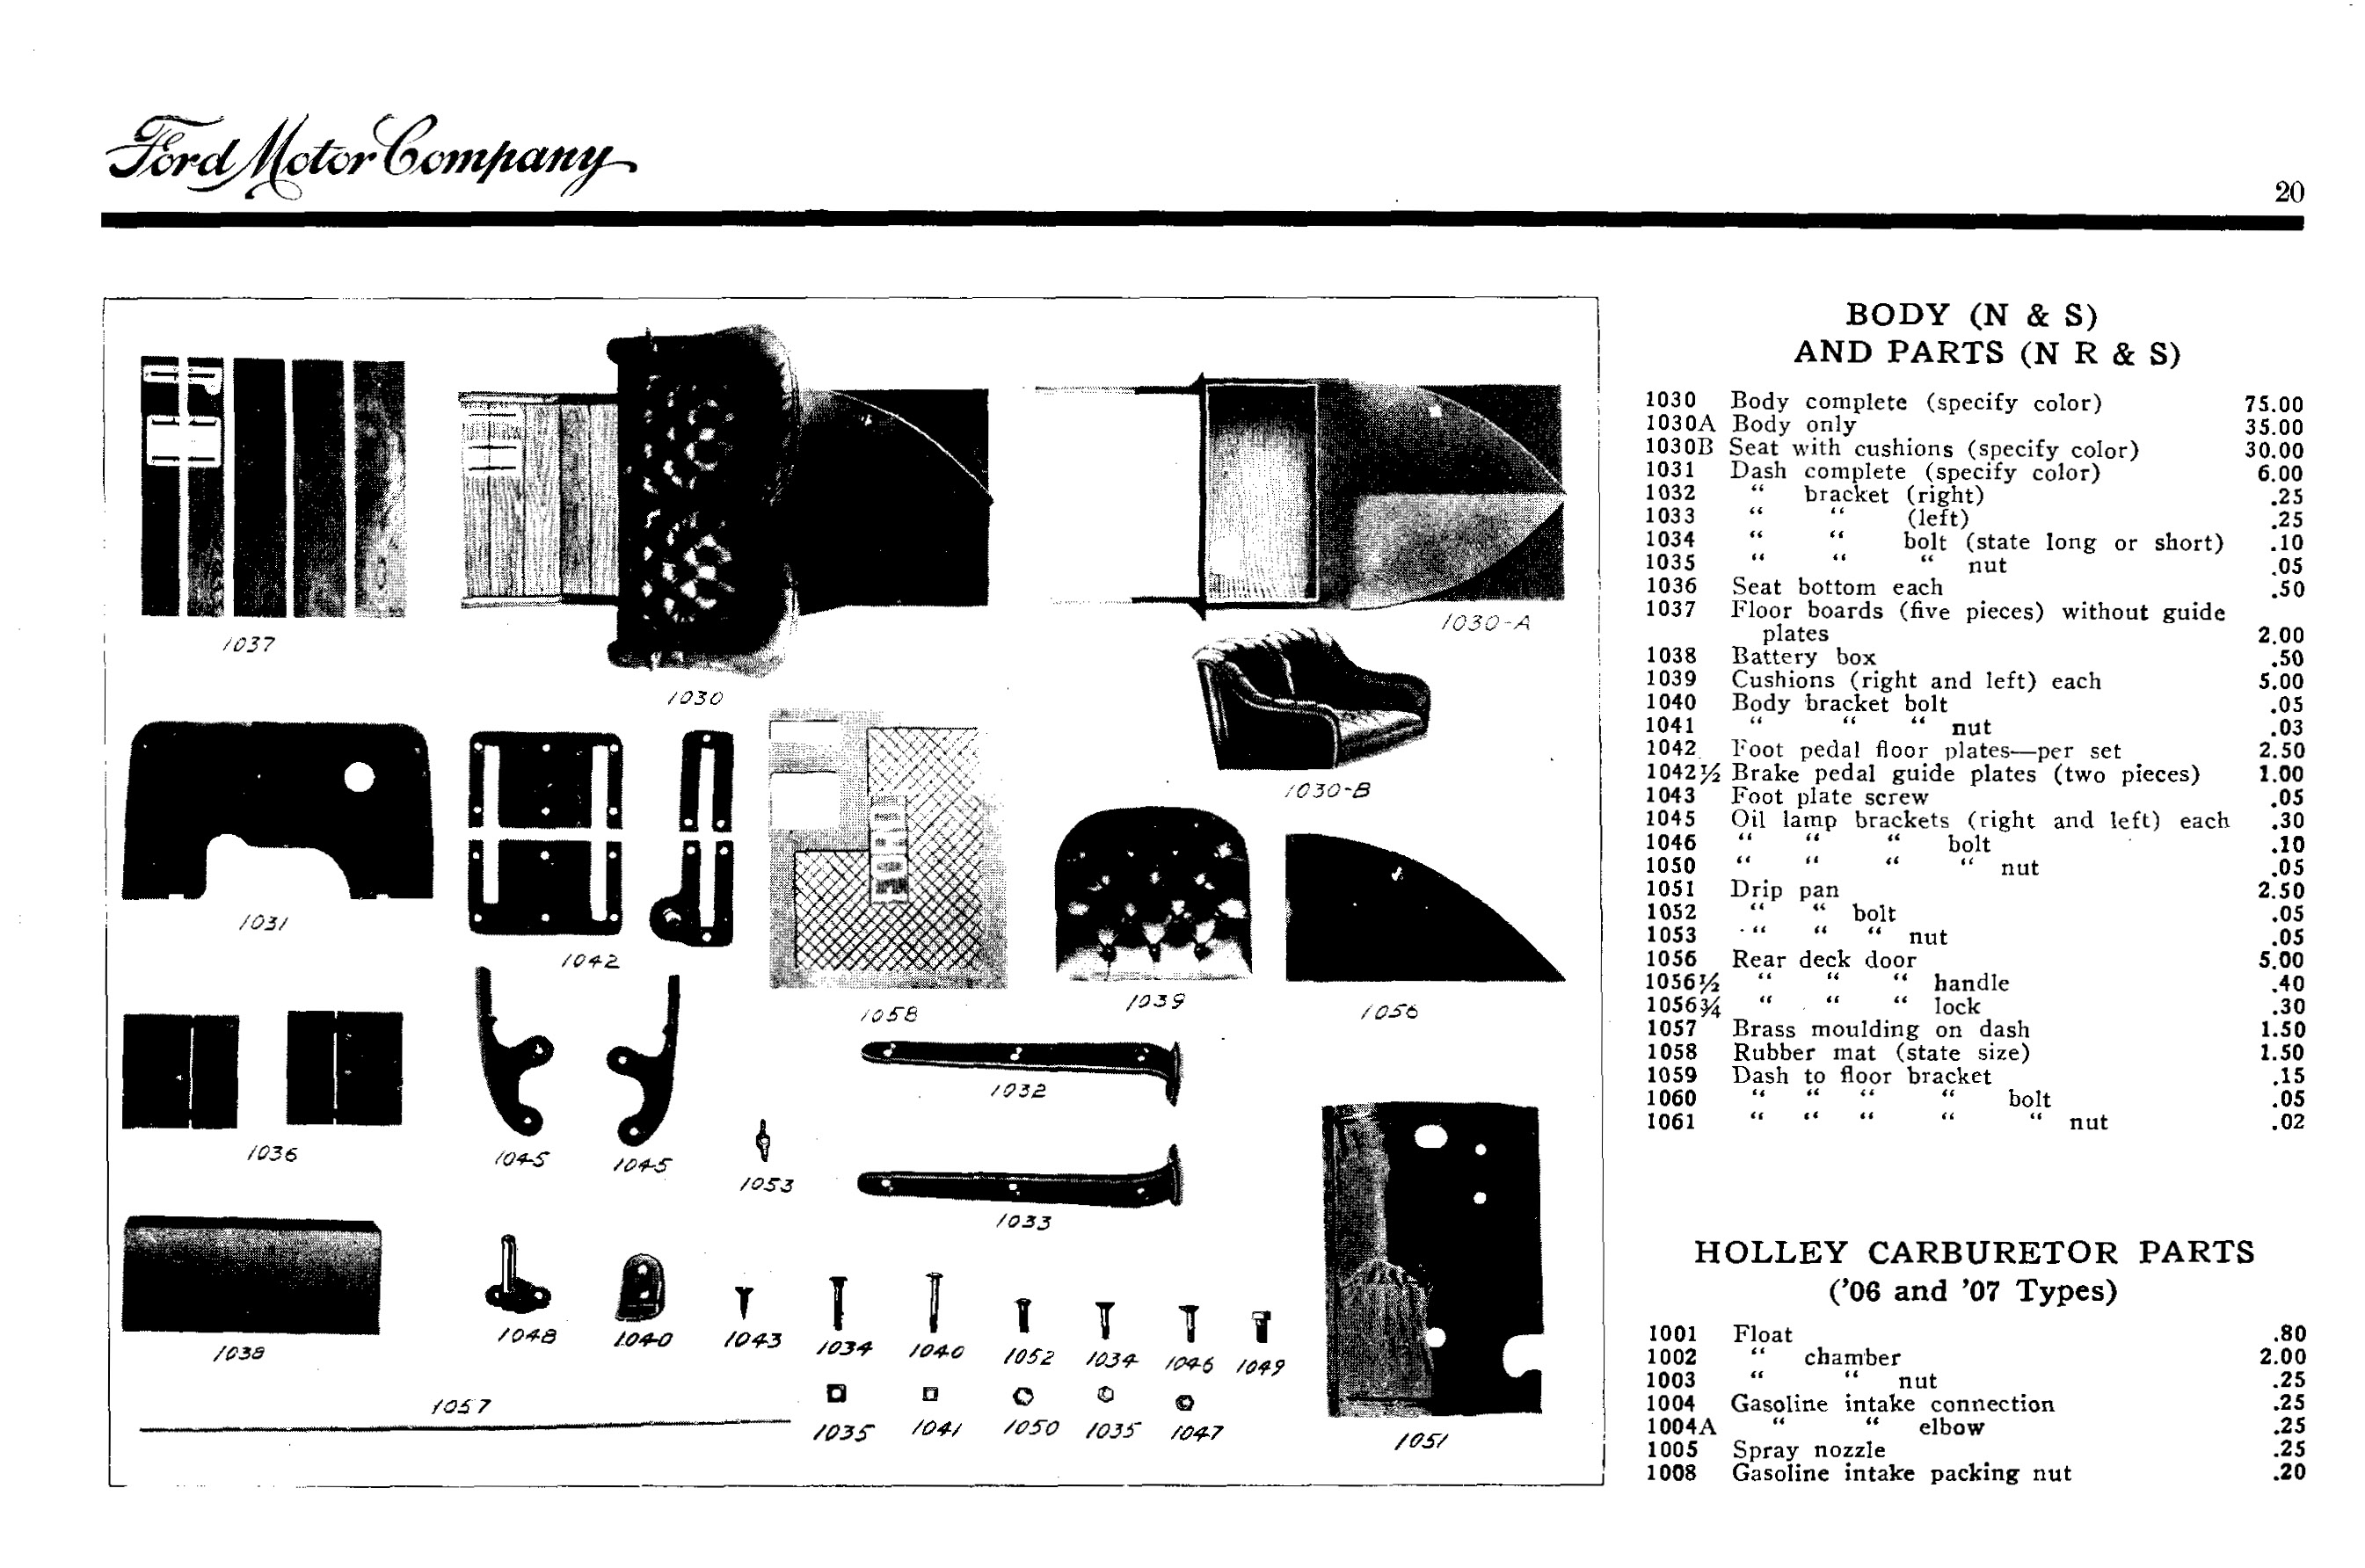 1907_Ford_Roadster_Parts_List-20